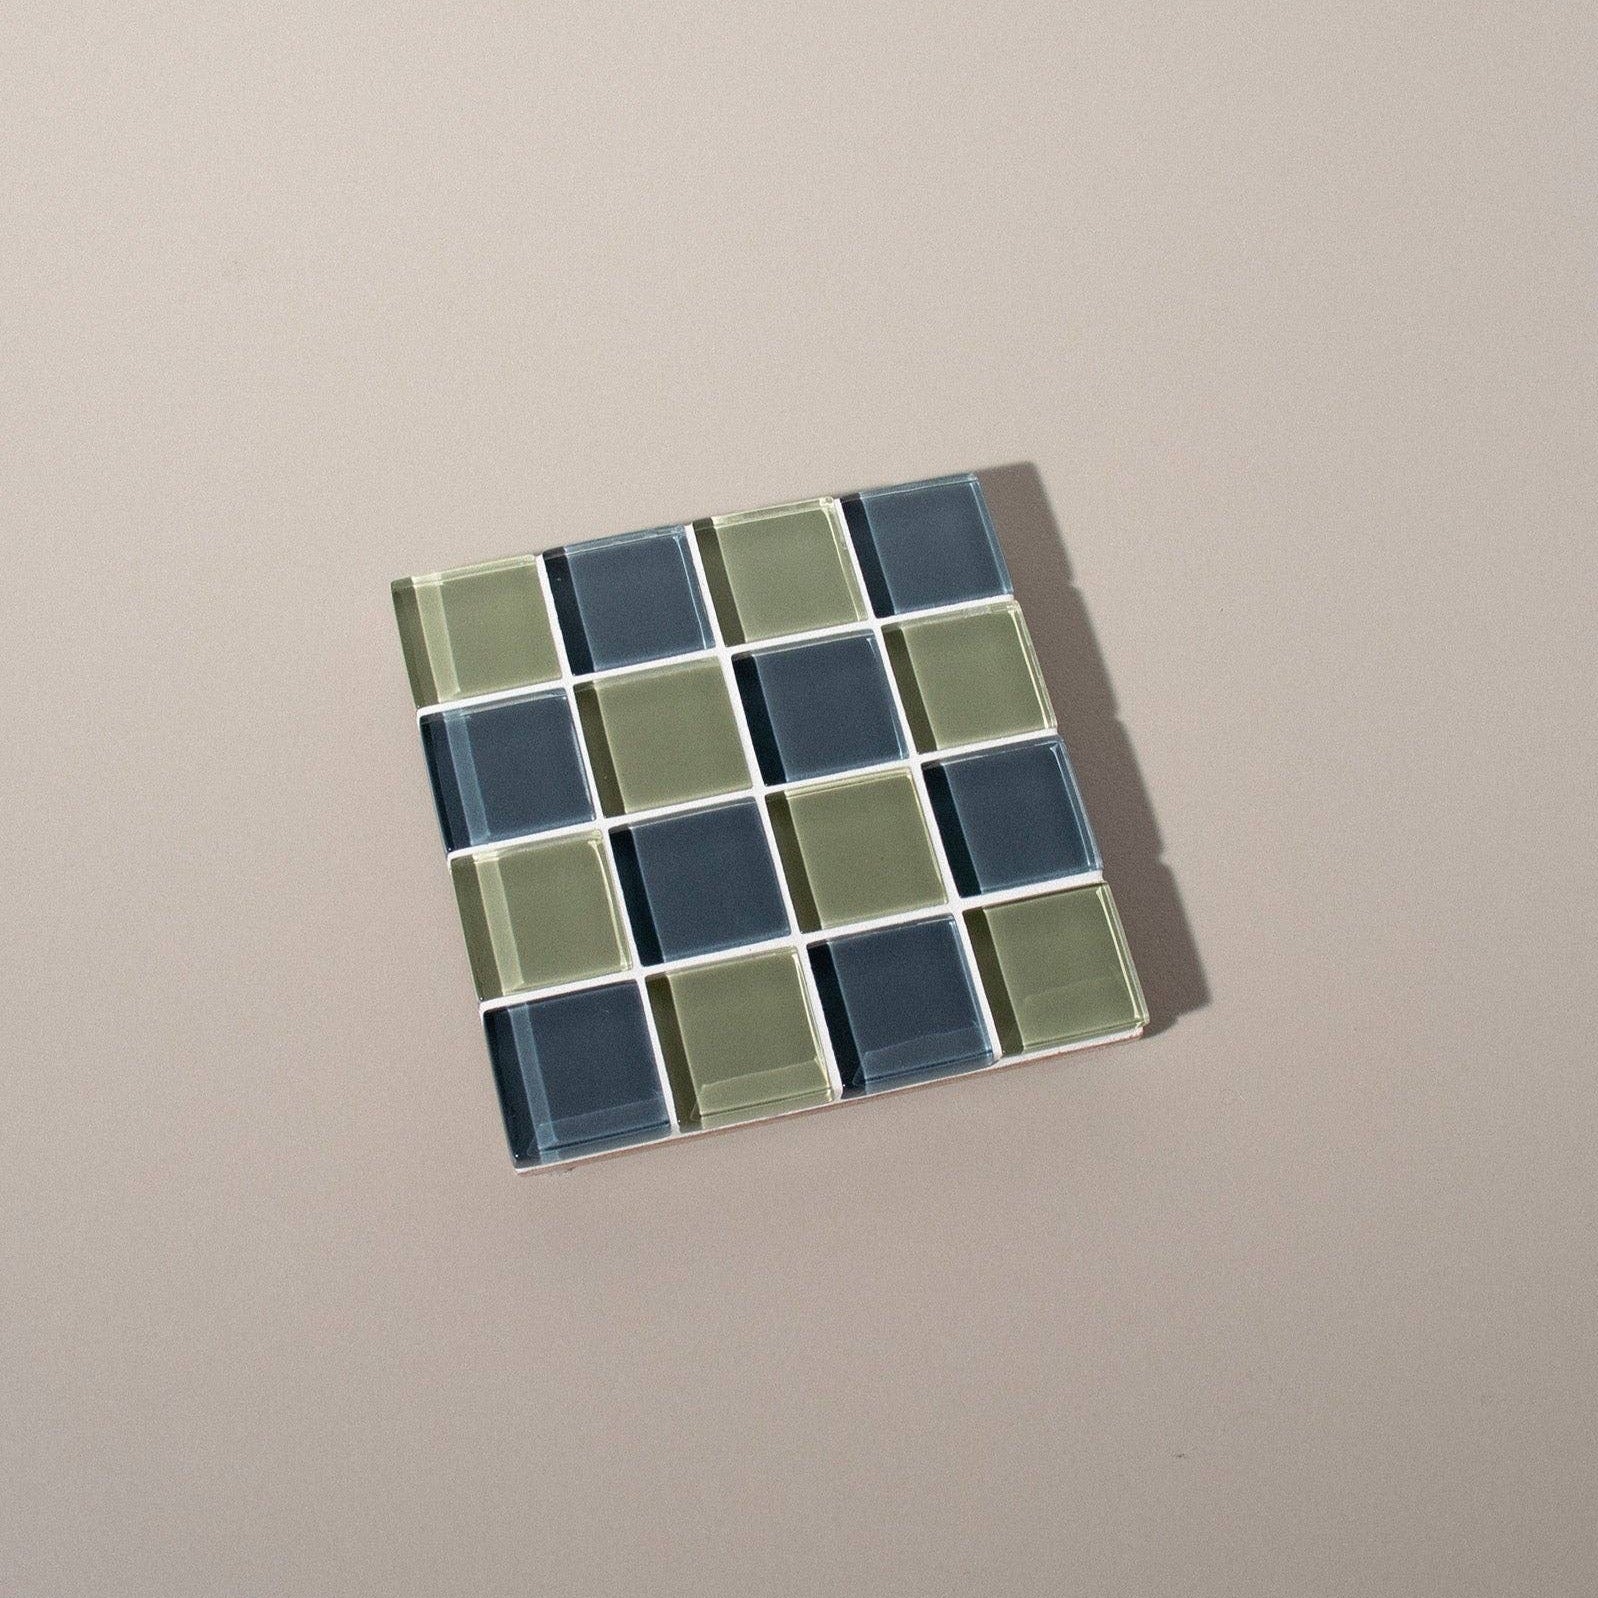 GLASS TILE COASTER - Dusted Moss: Single by Subtle Art Studios